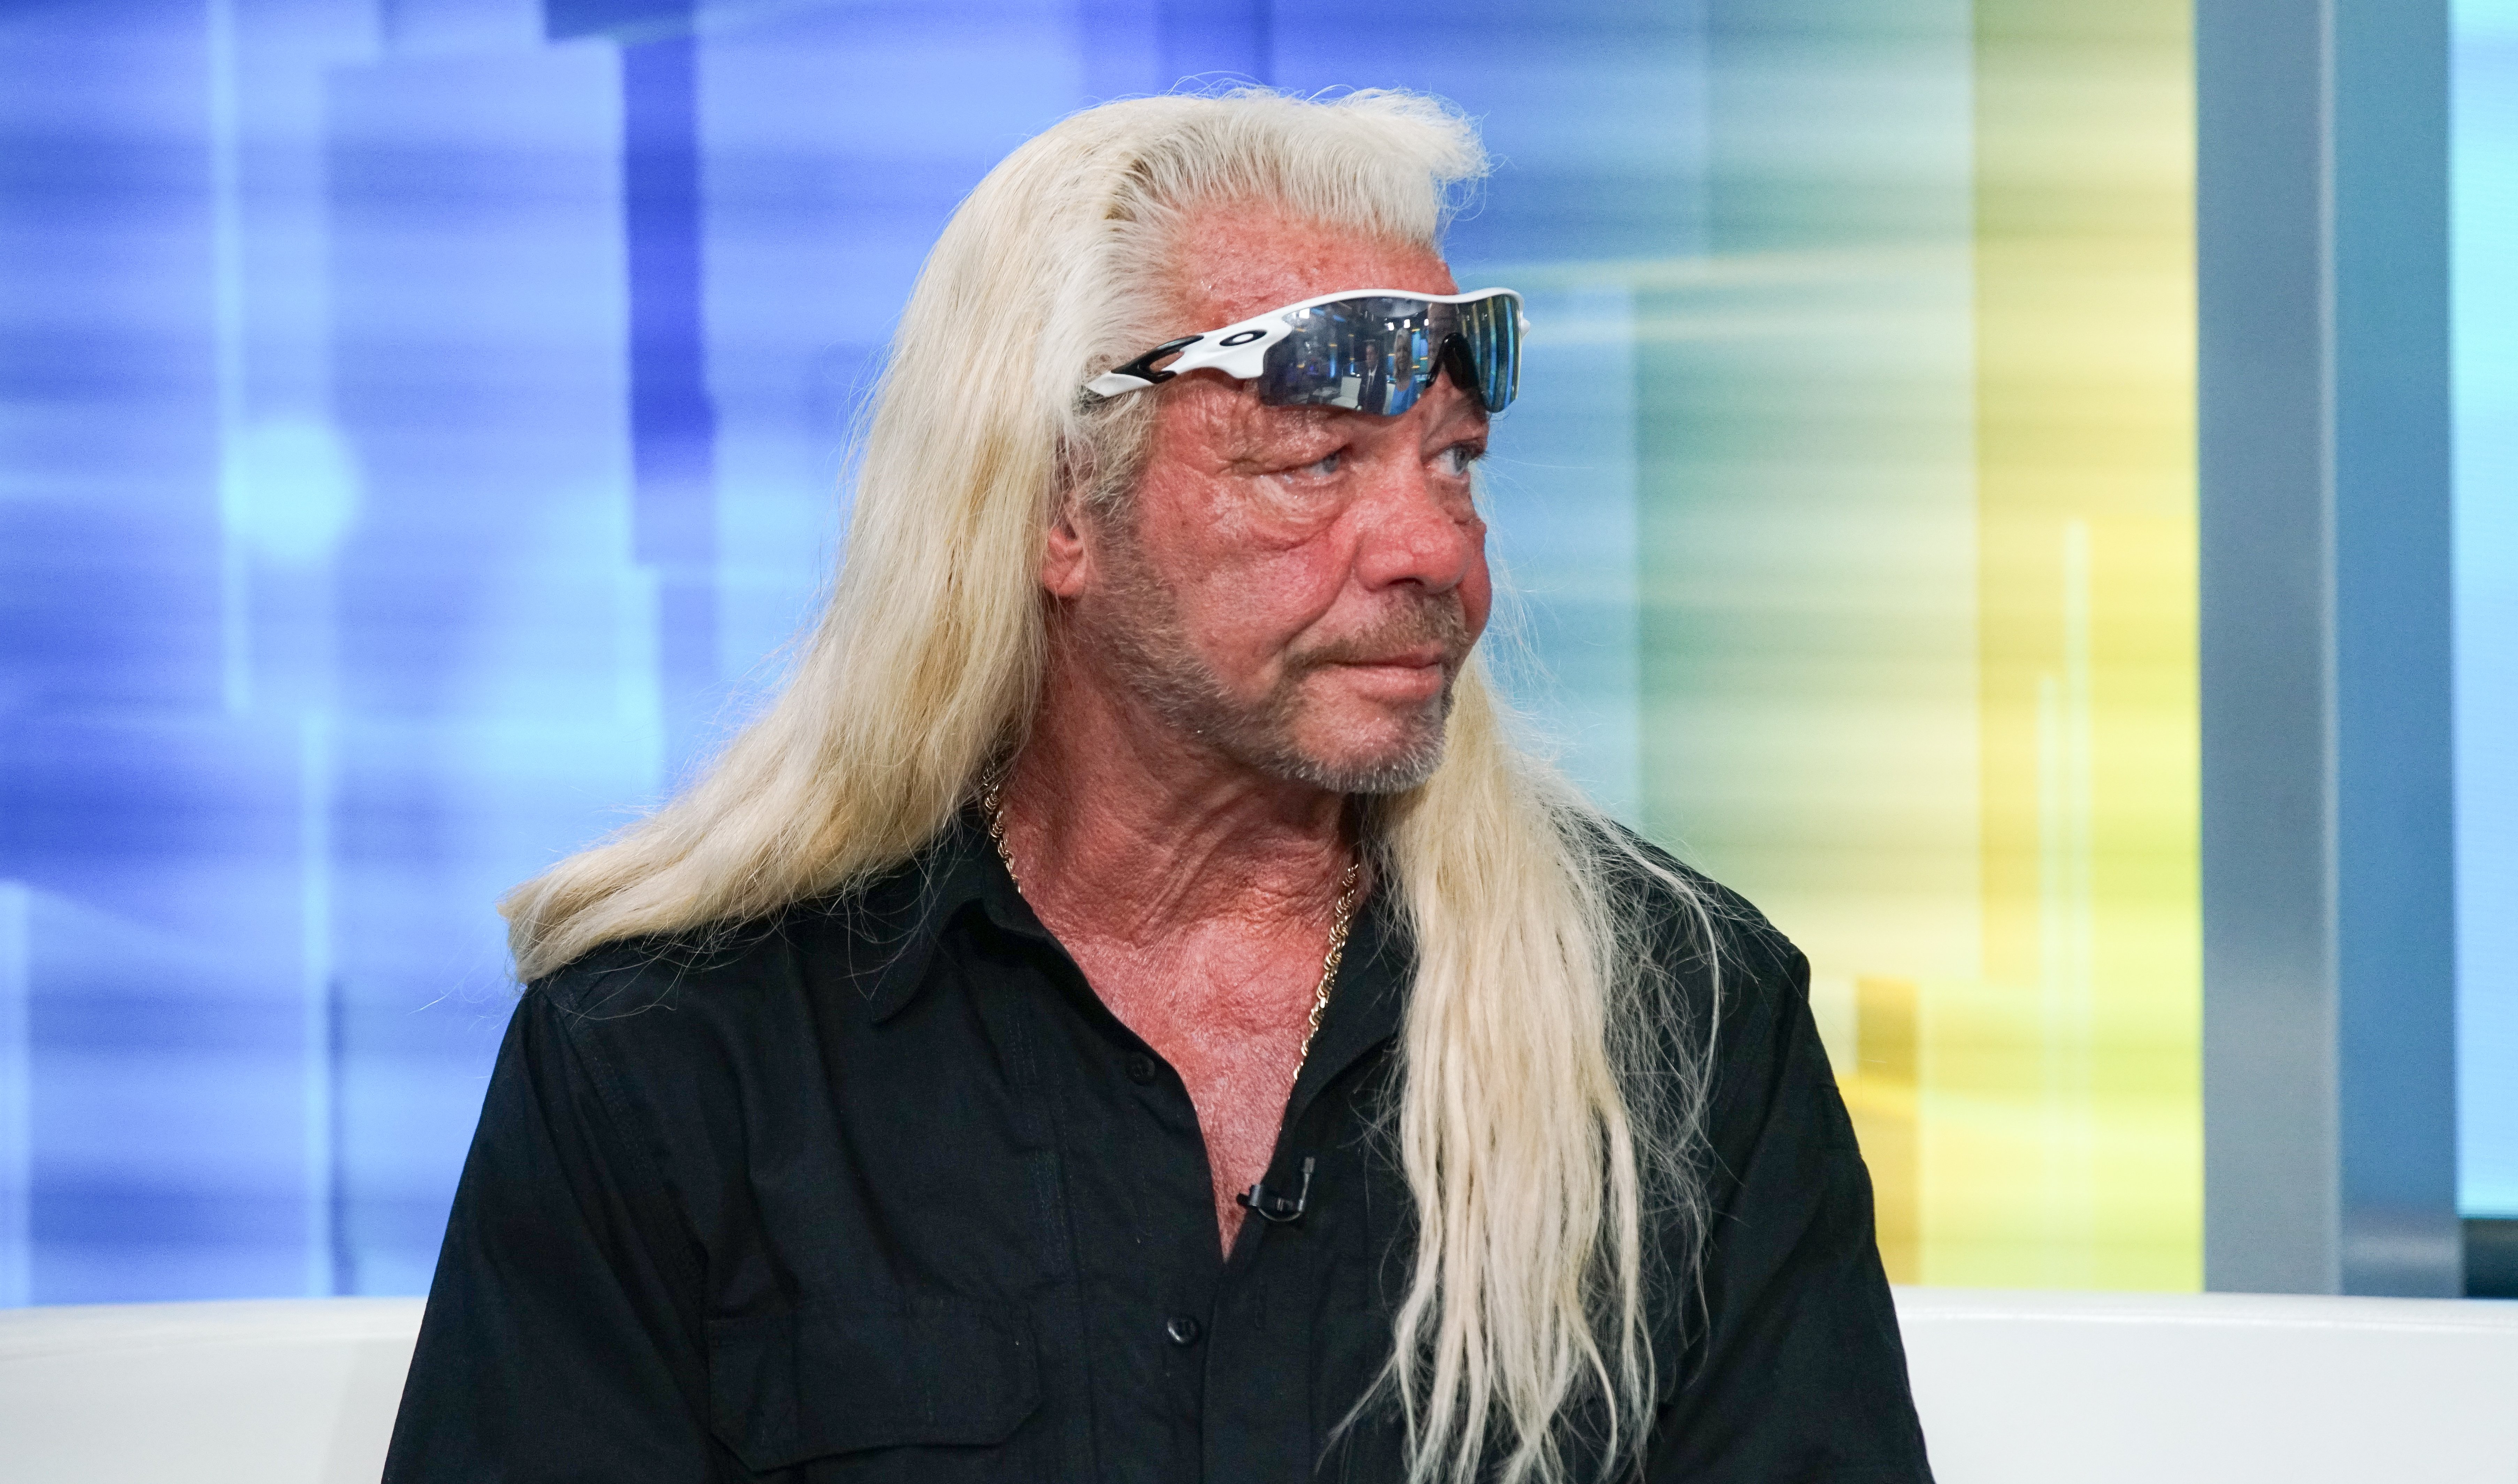 Duane Chapman aka Dog the Bounty Hunter visits "FOX & Friends" at FOX Studios on August 28, 2019, in New York City. | Source: Getty Images.